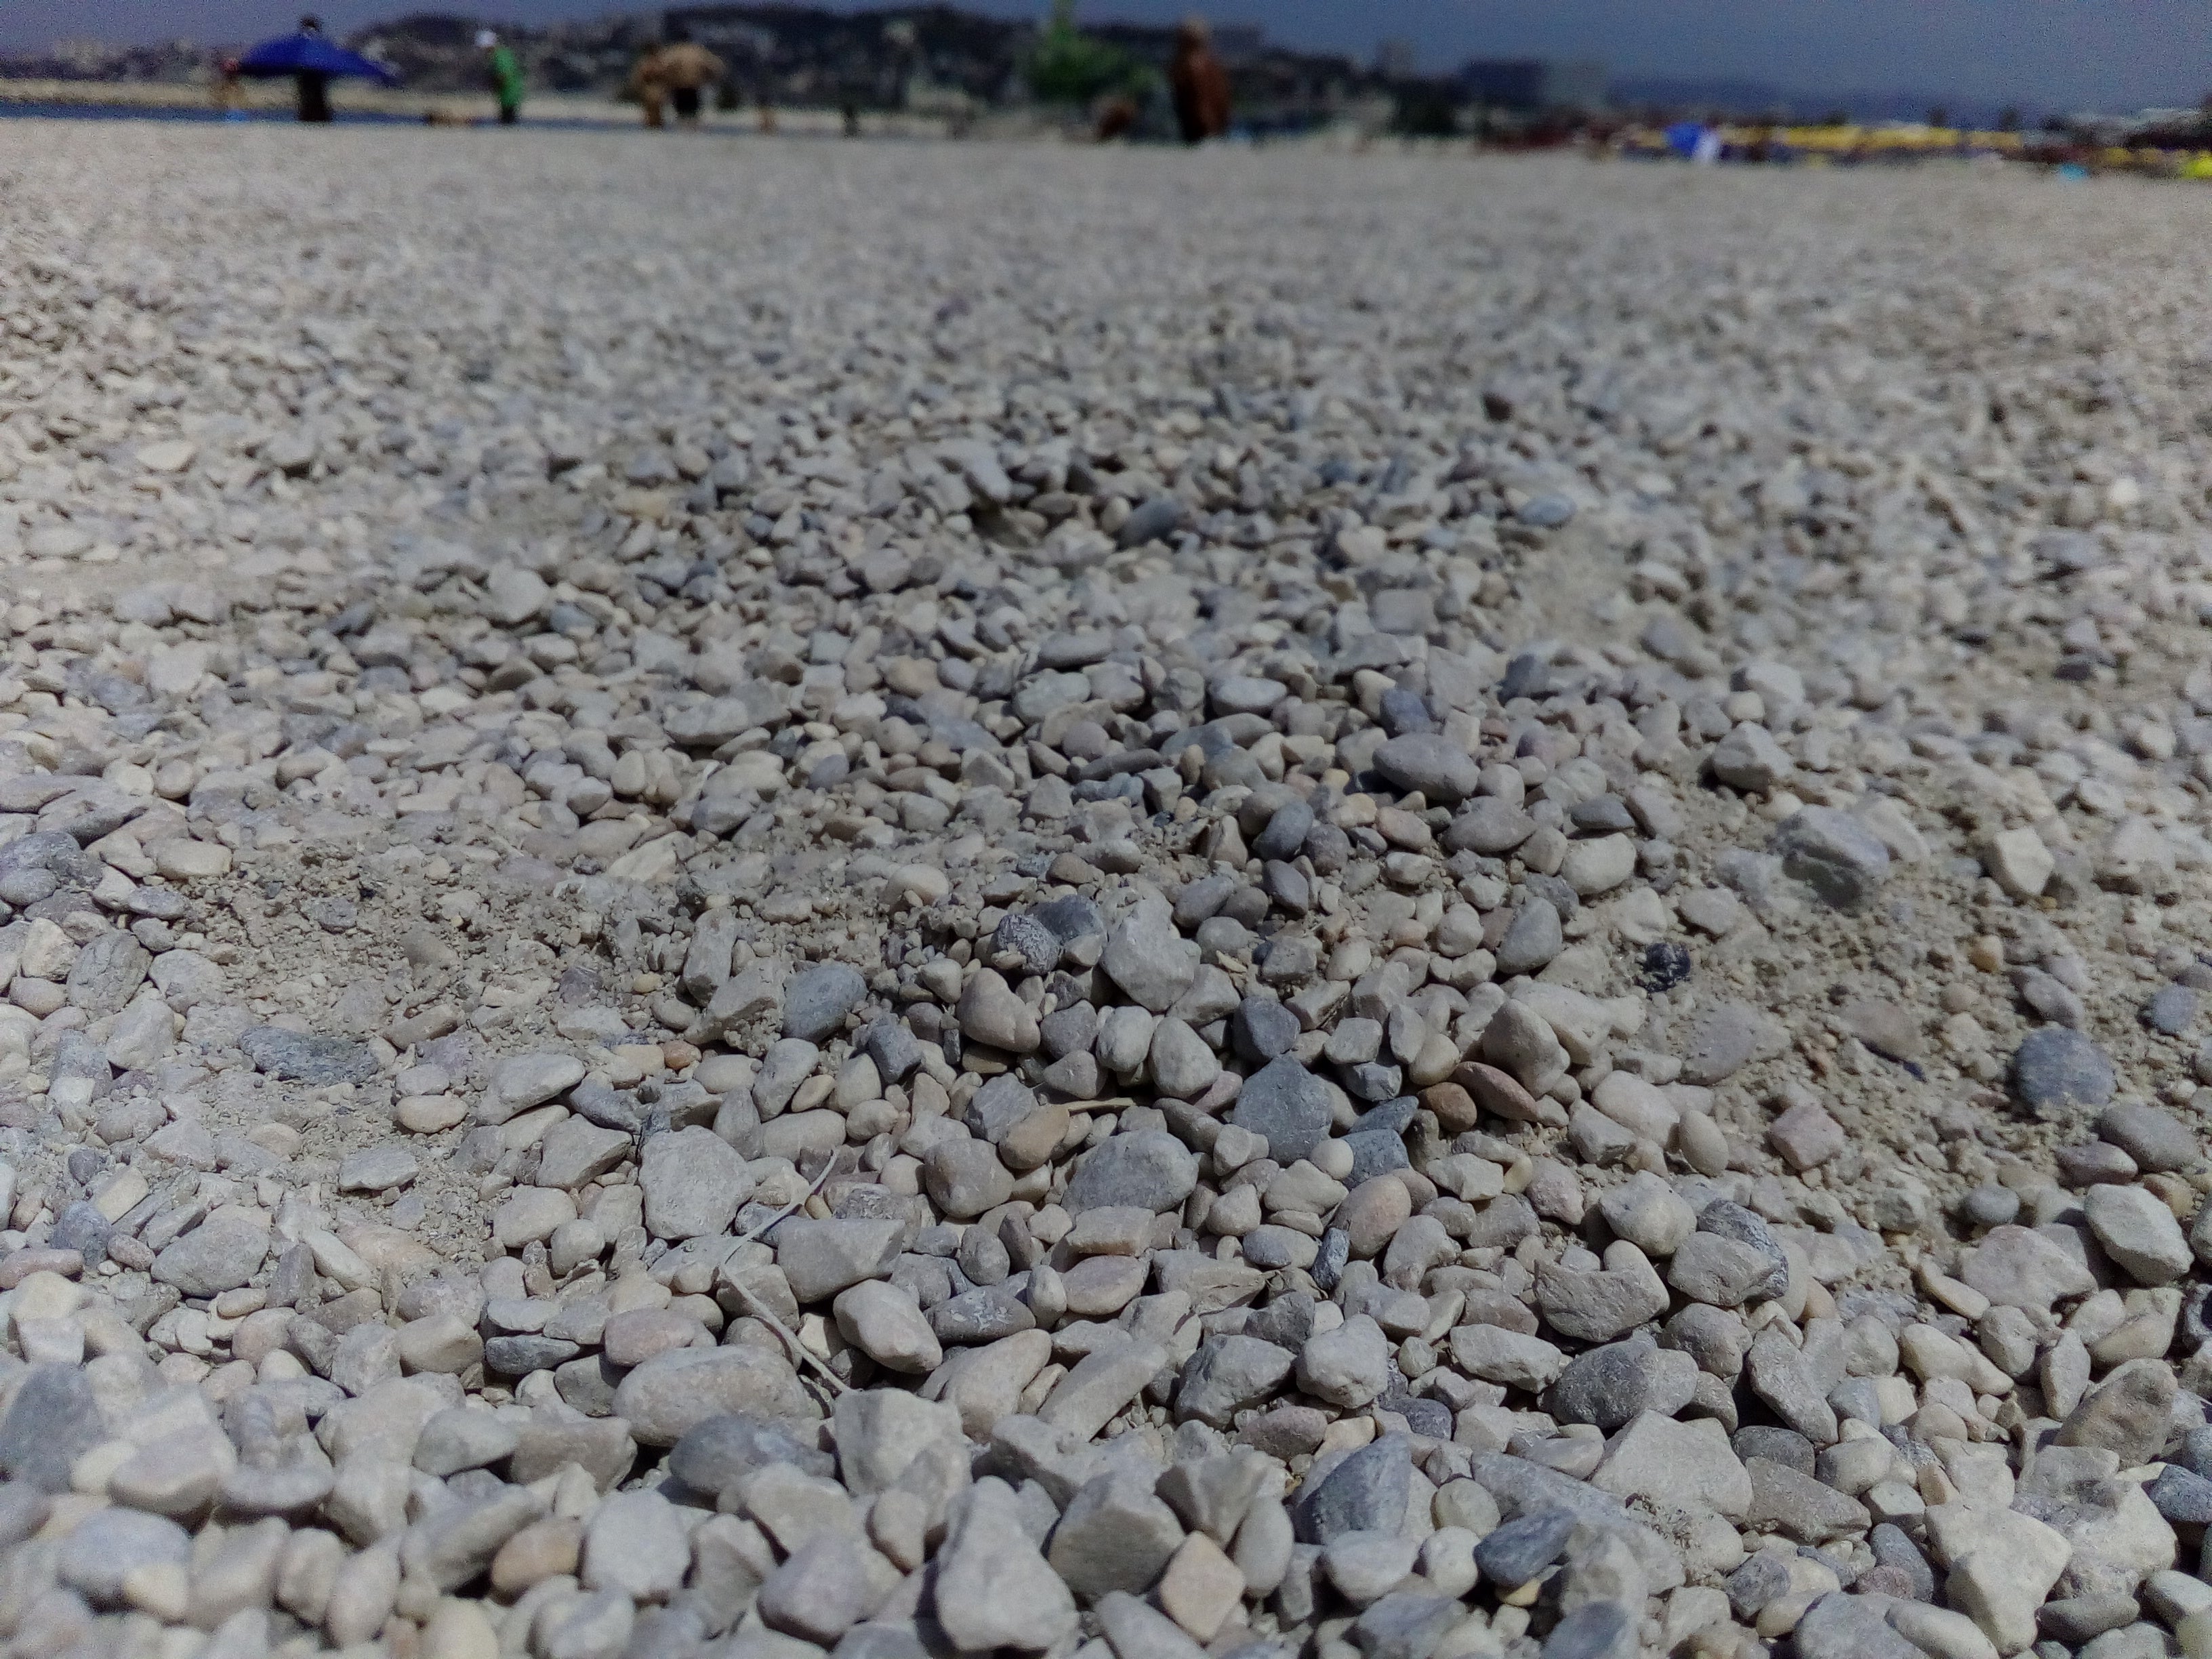 Close-up photo of gravel taken by a camera under review.